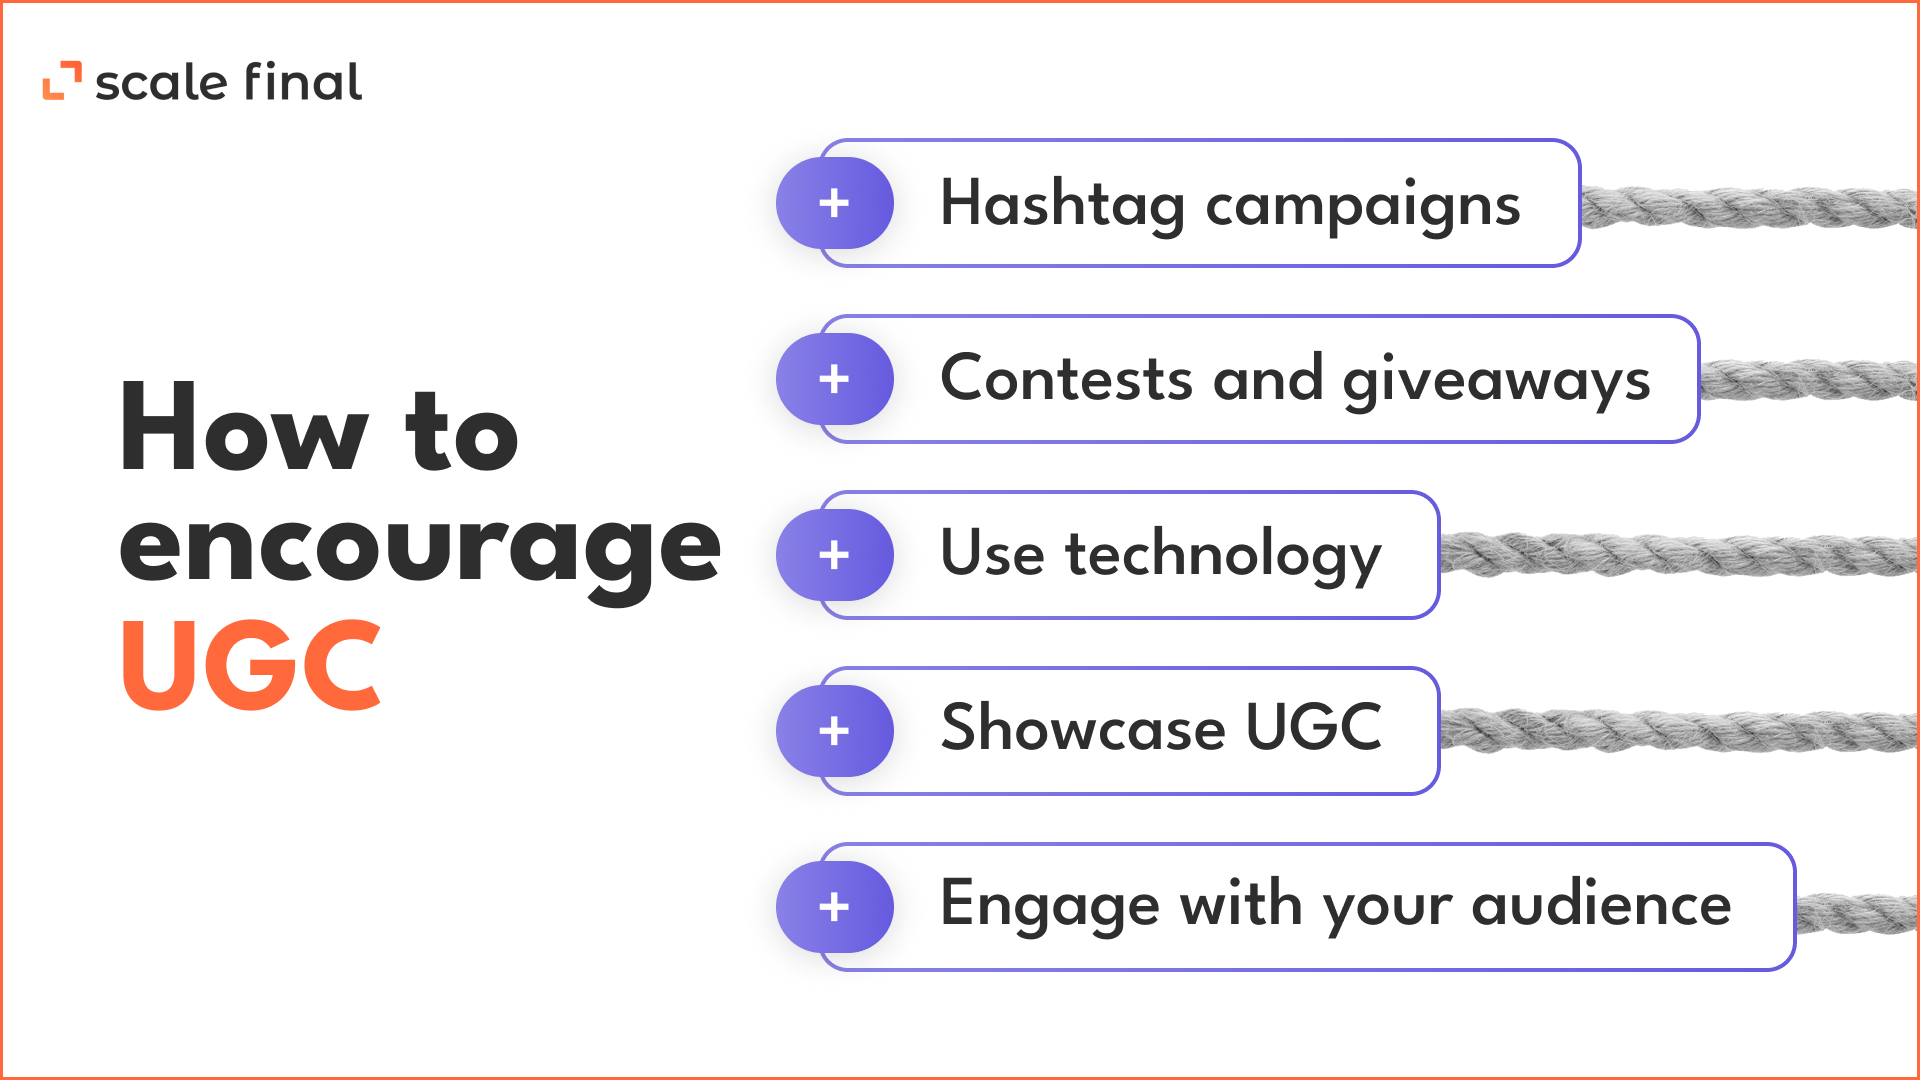 How to encourage UGCHashtag campaignsContests and giveawaysUse technologyShowcase UGCEngage with your audience